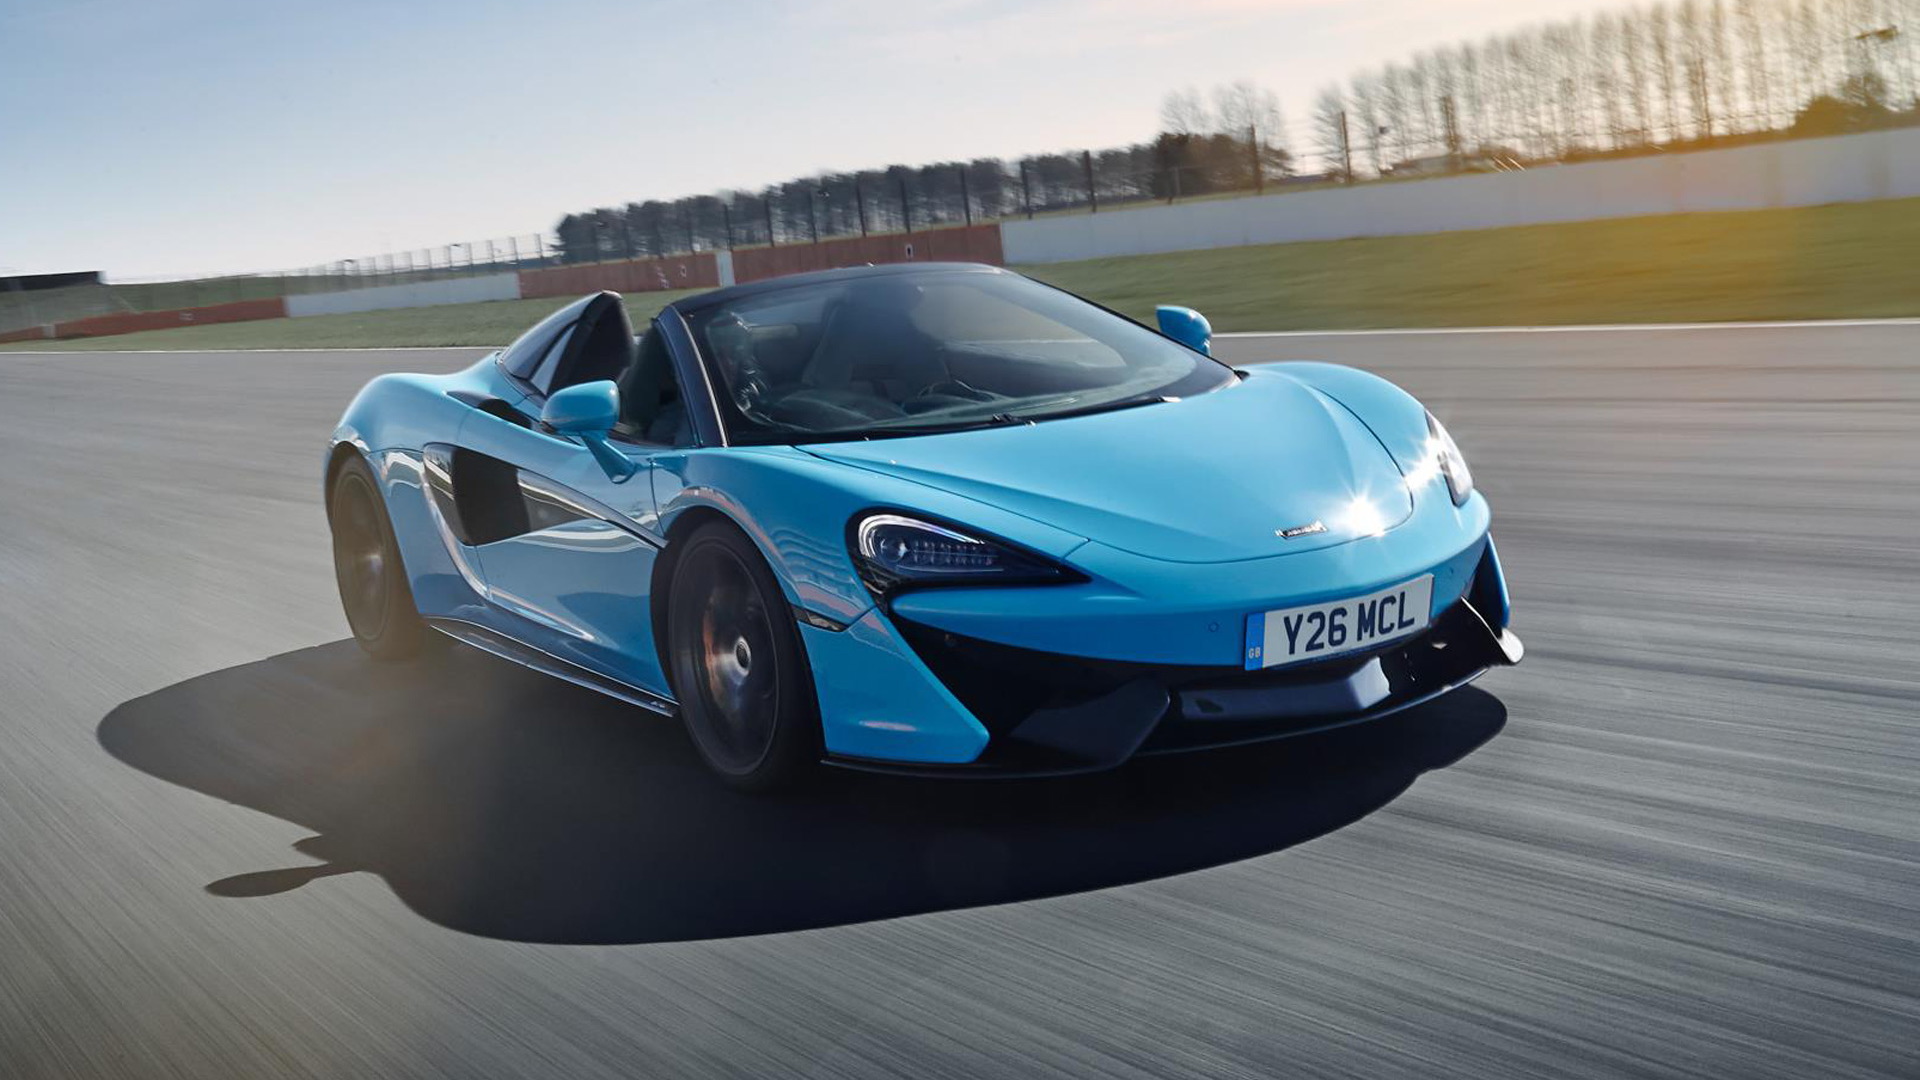 2019 McLaren 570S Spider equipped with Track Pack